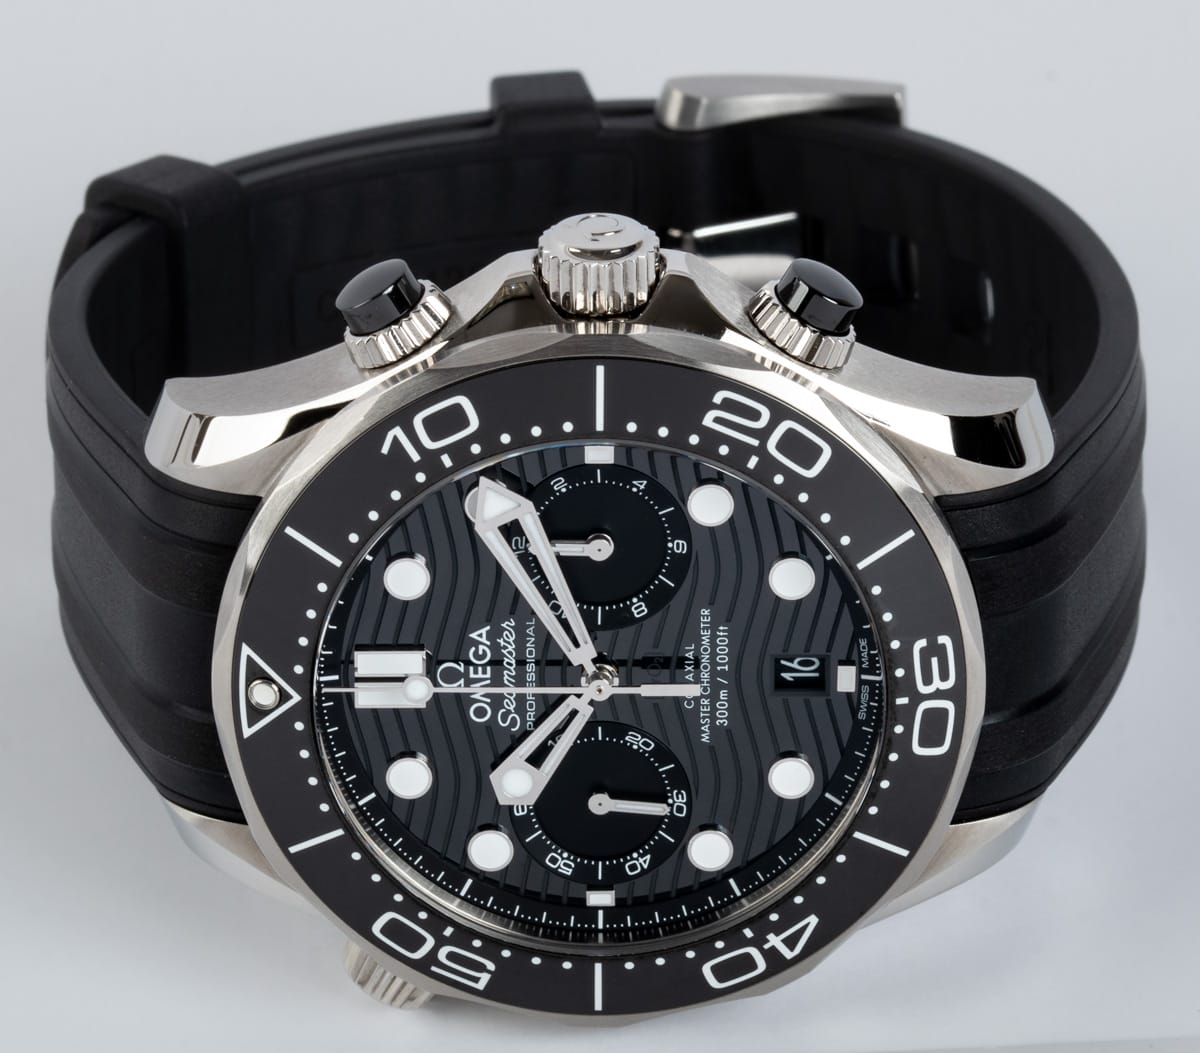 Front View of Seamaster Diver 300m Chronograph